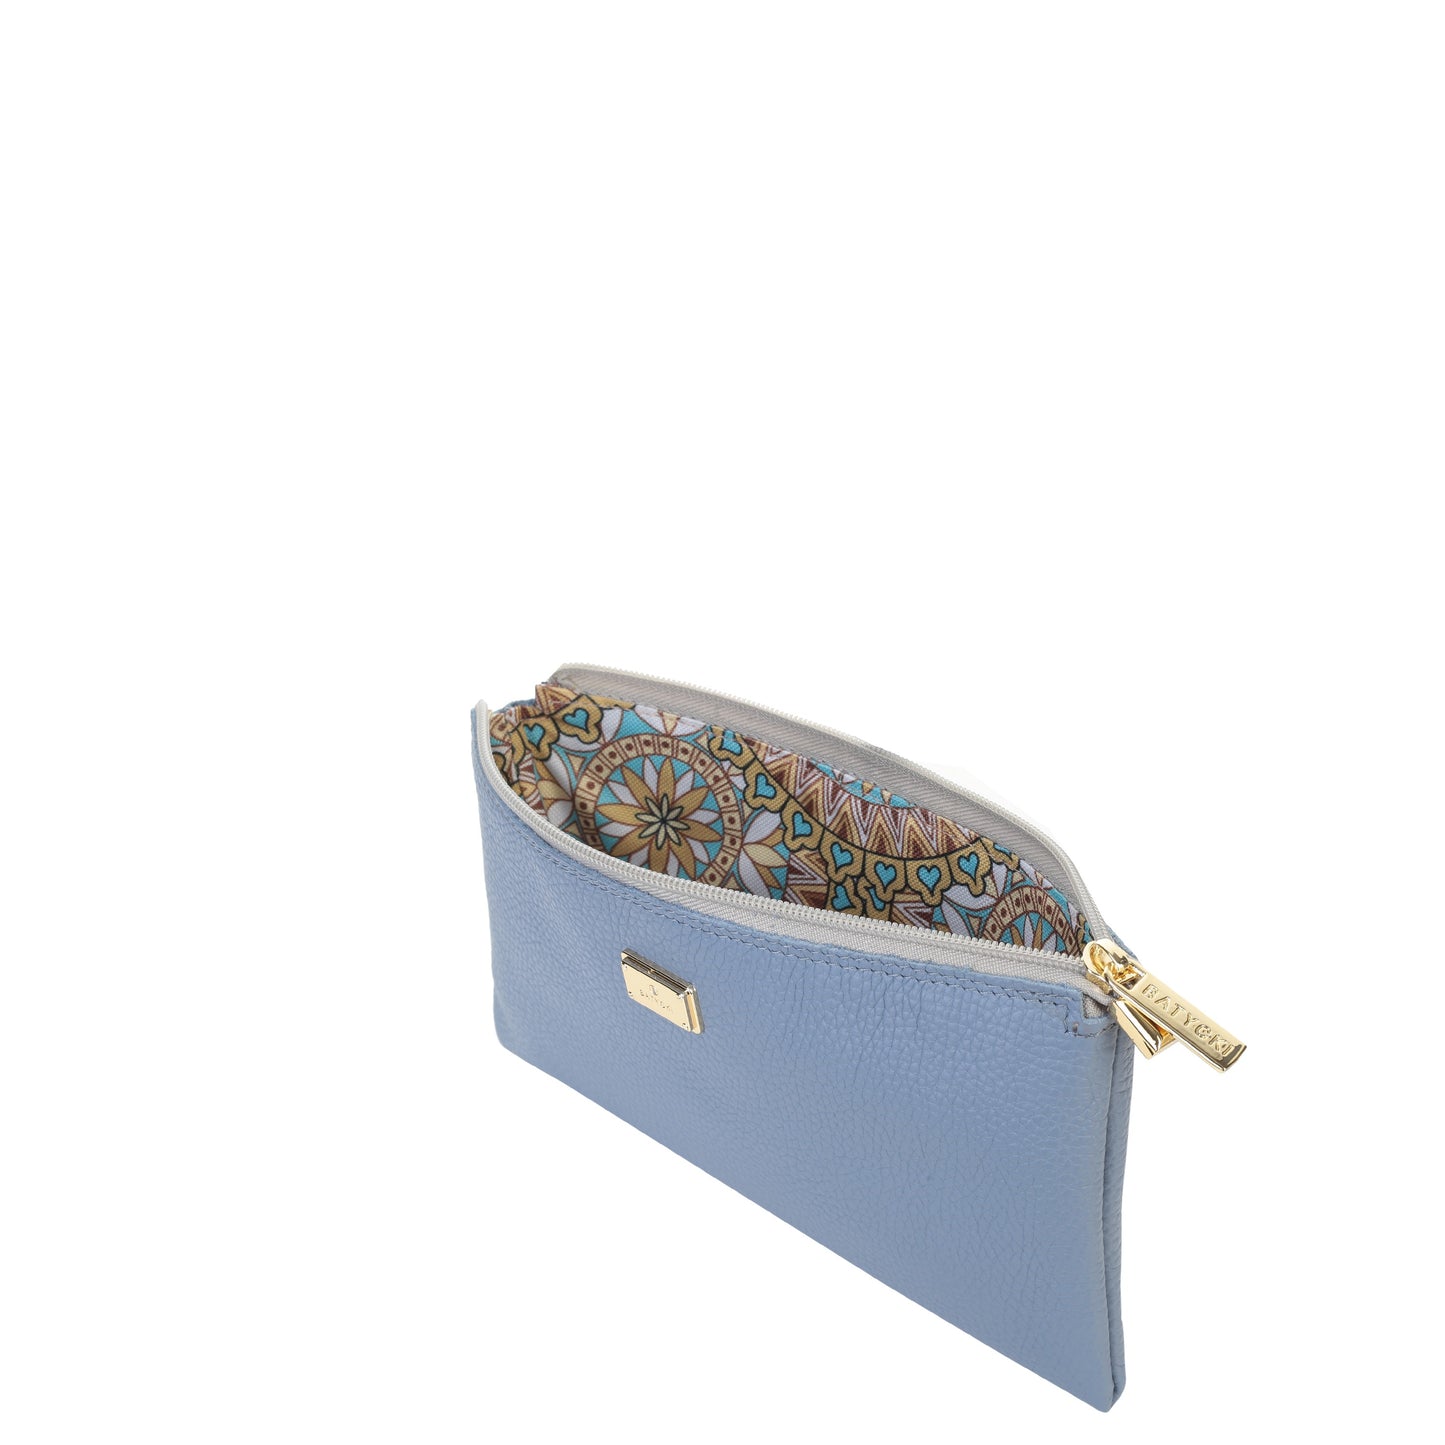 LEATHER COSMETIC BAG mousse blue